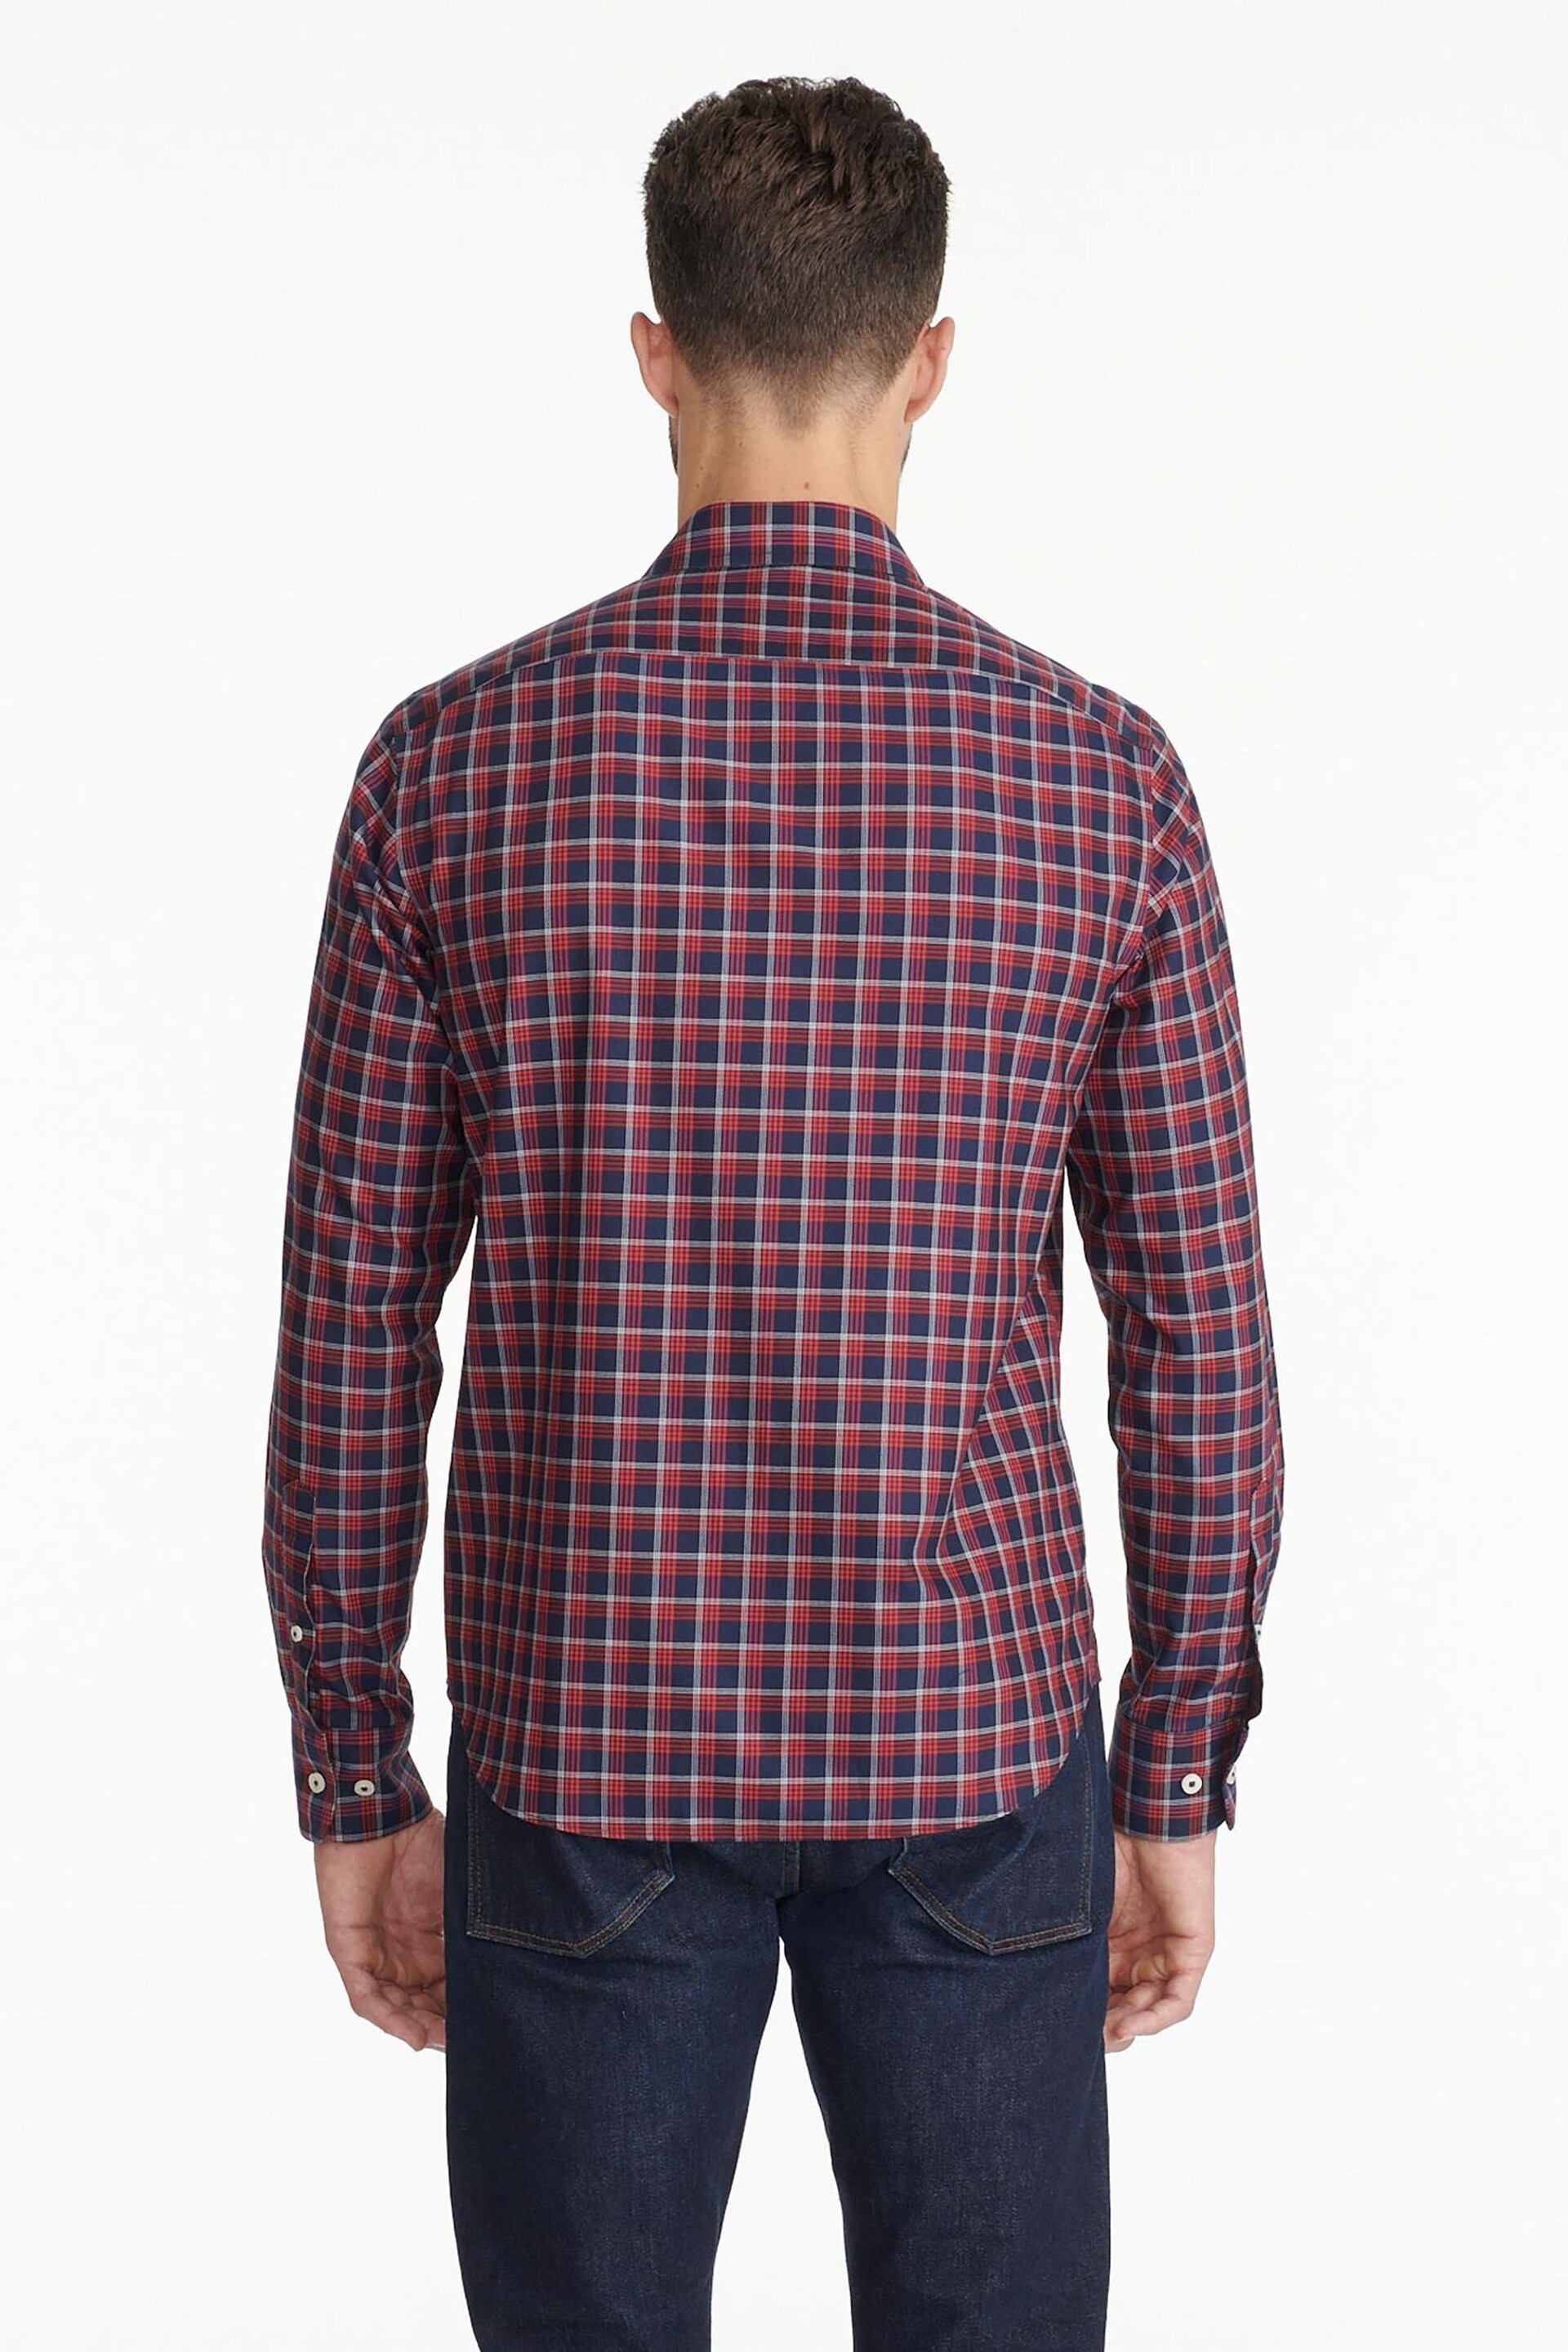 UNTUCKit Red/Blue Wrinkle-Free Slim Fit Cheny Shirt - Image 2 of 6